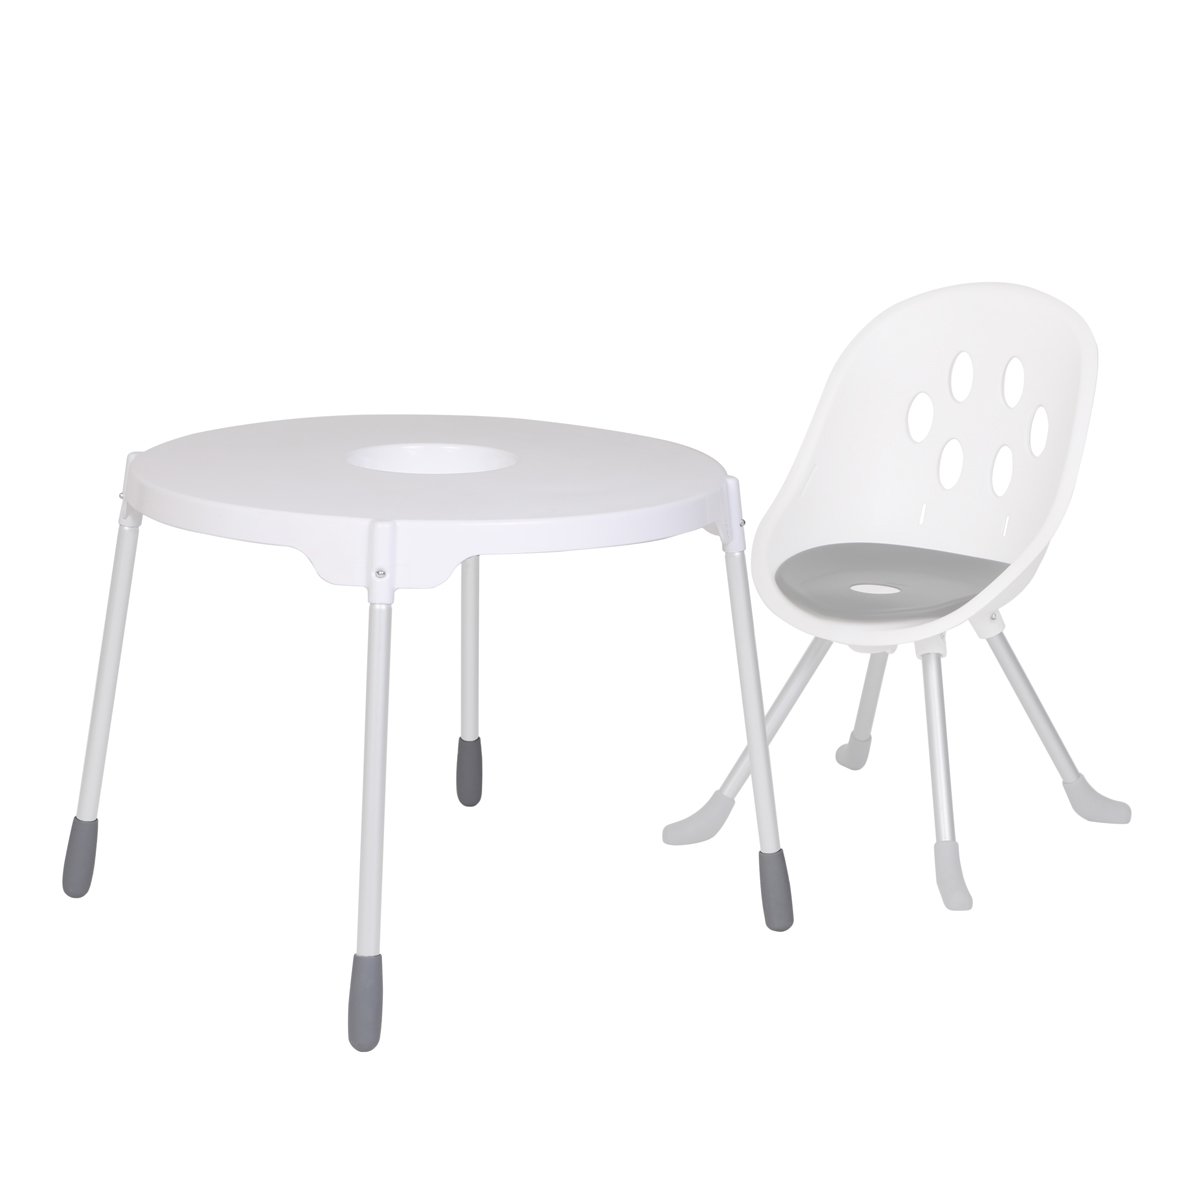 https://cdn.accentuate.io/4675449454688/19440099492024/phil_and_teds_poppy_table_top_with_leg_set_and_poppy_high_chair_1-v1630984550316.jpg?1200x1200